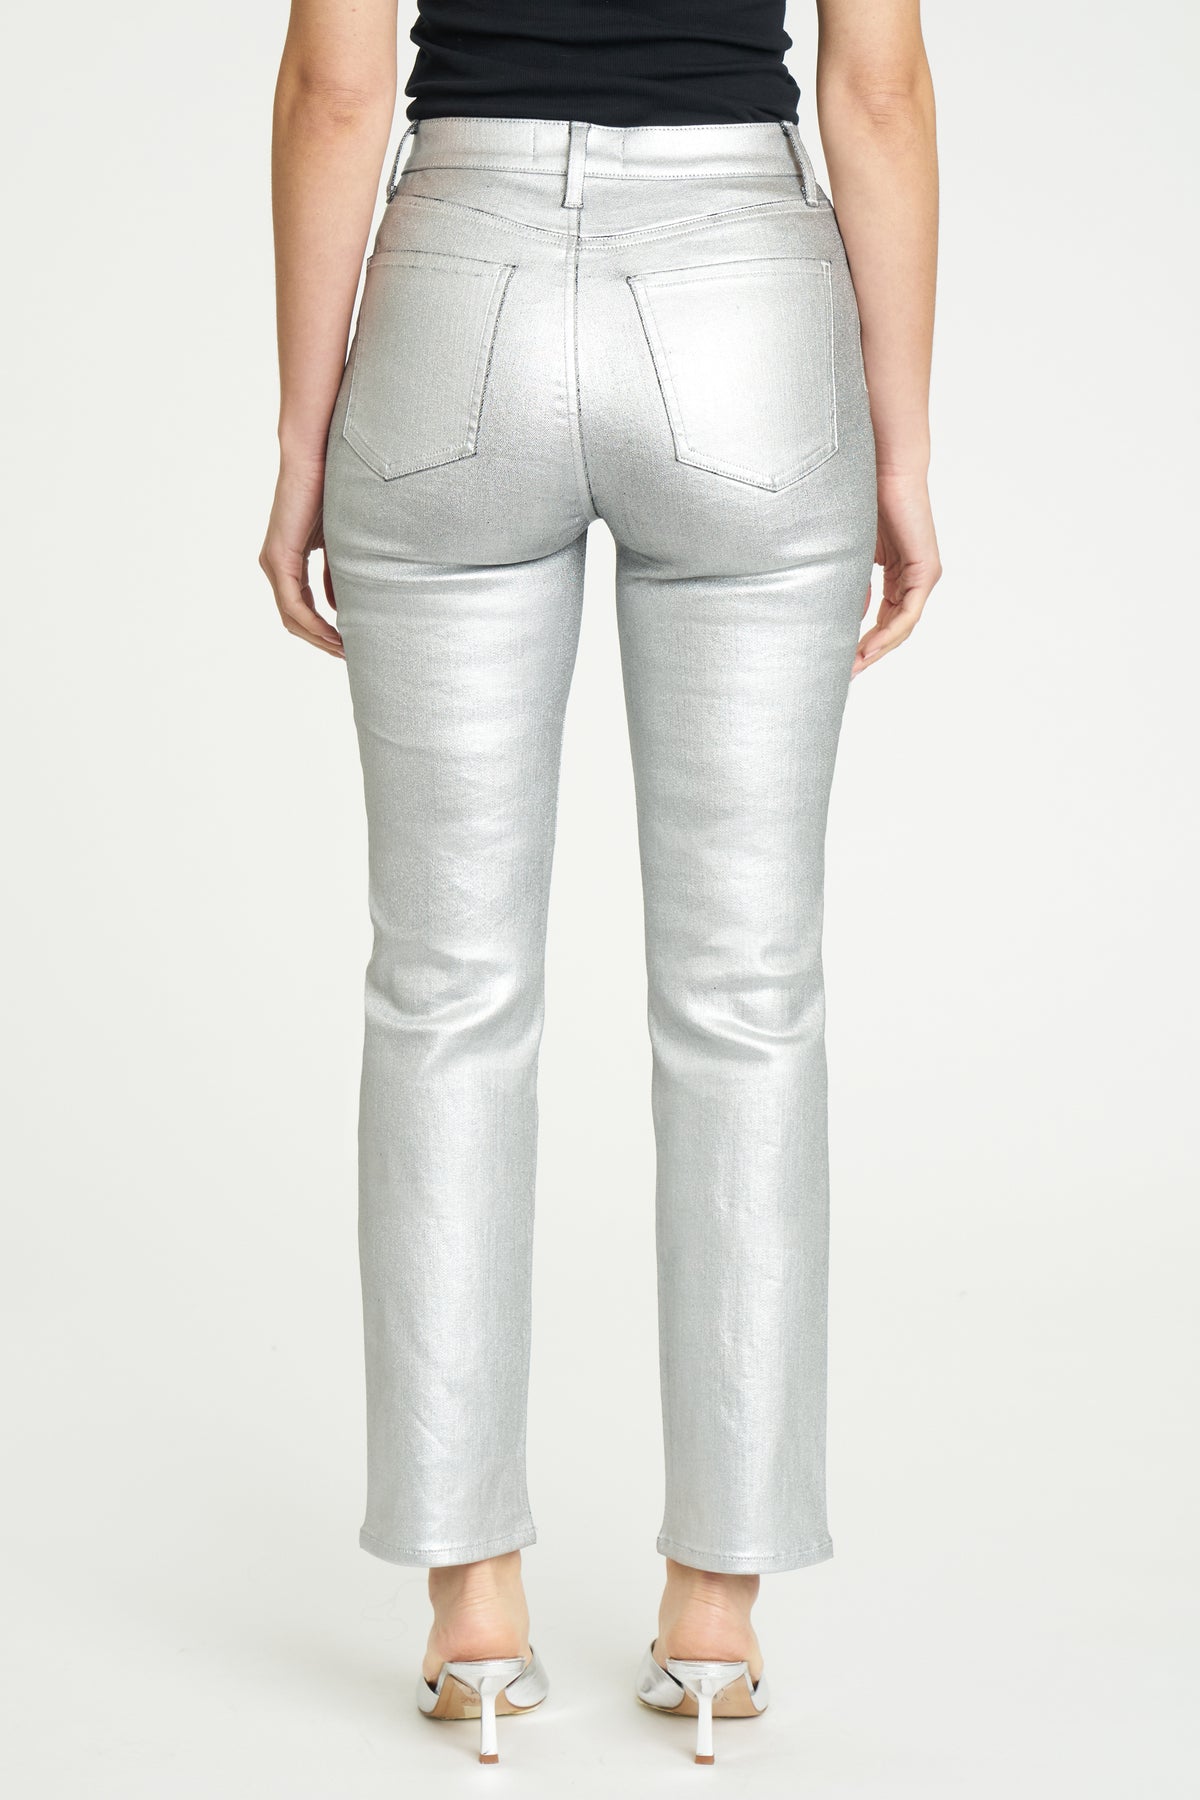 Smarty Pants High Rise Slim in Coated Silver Bullet